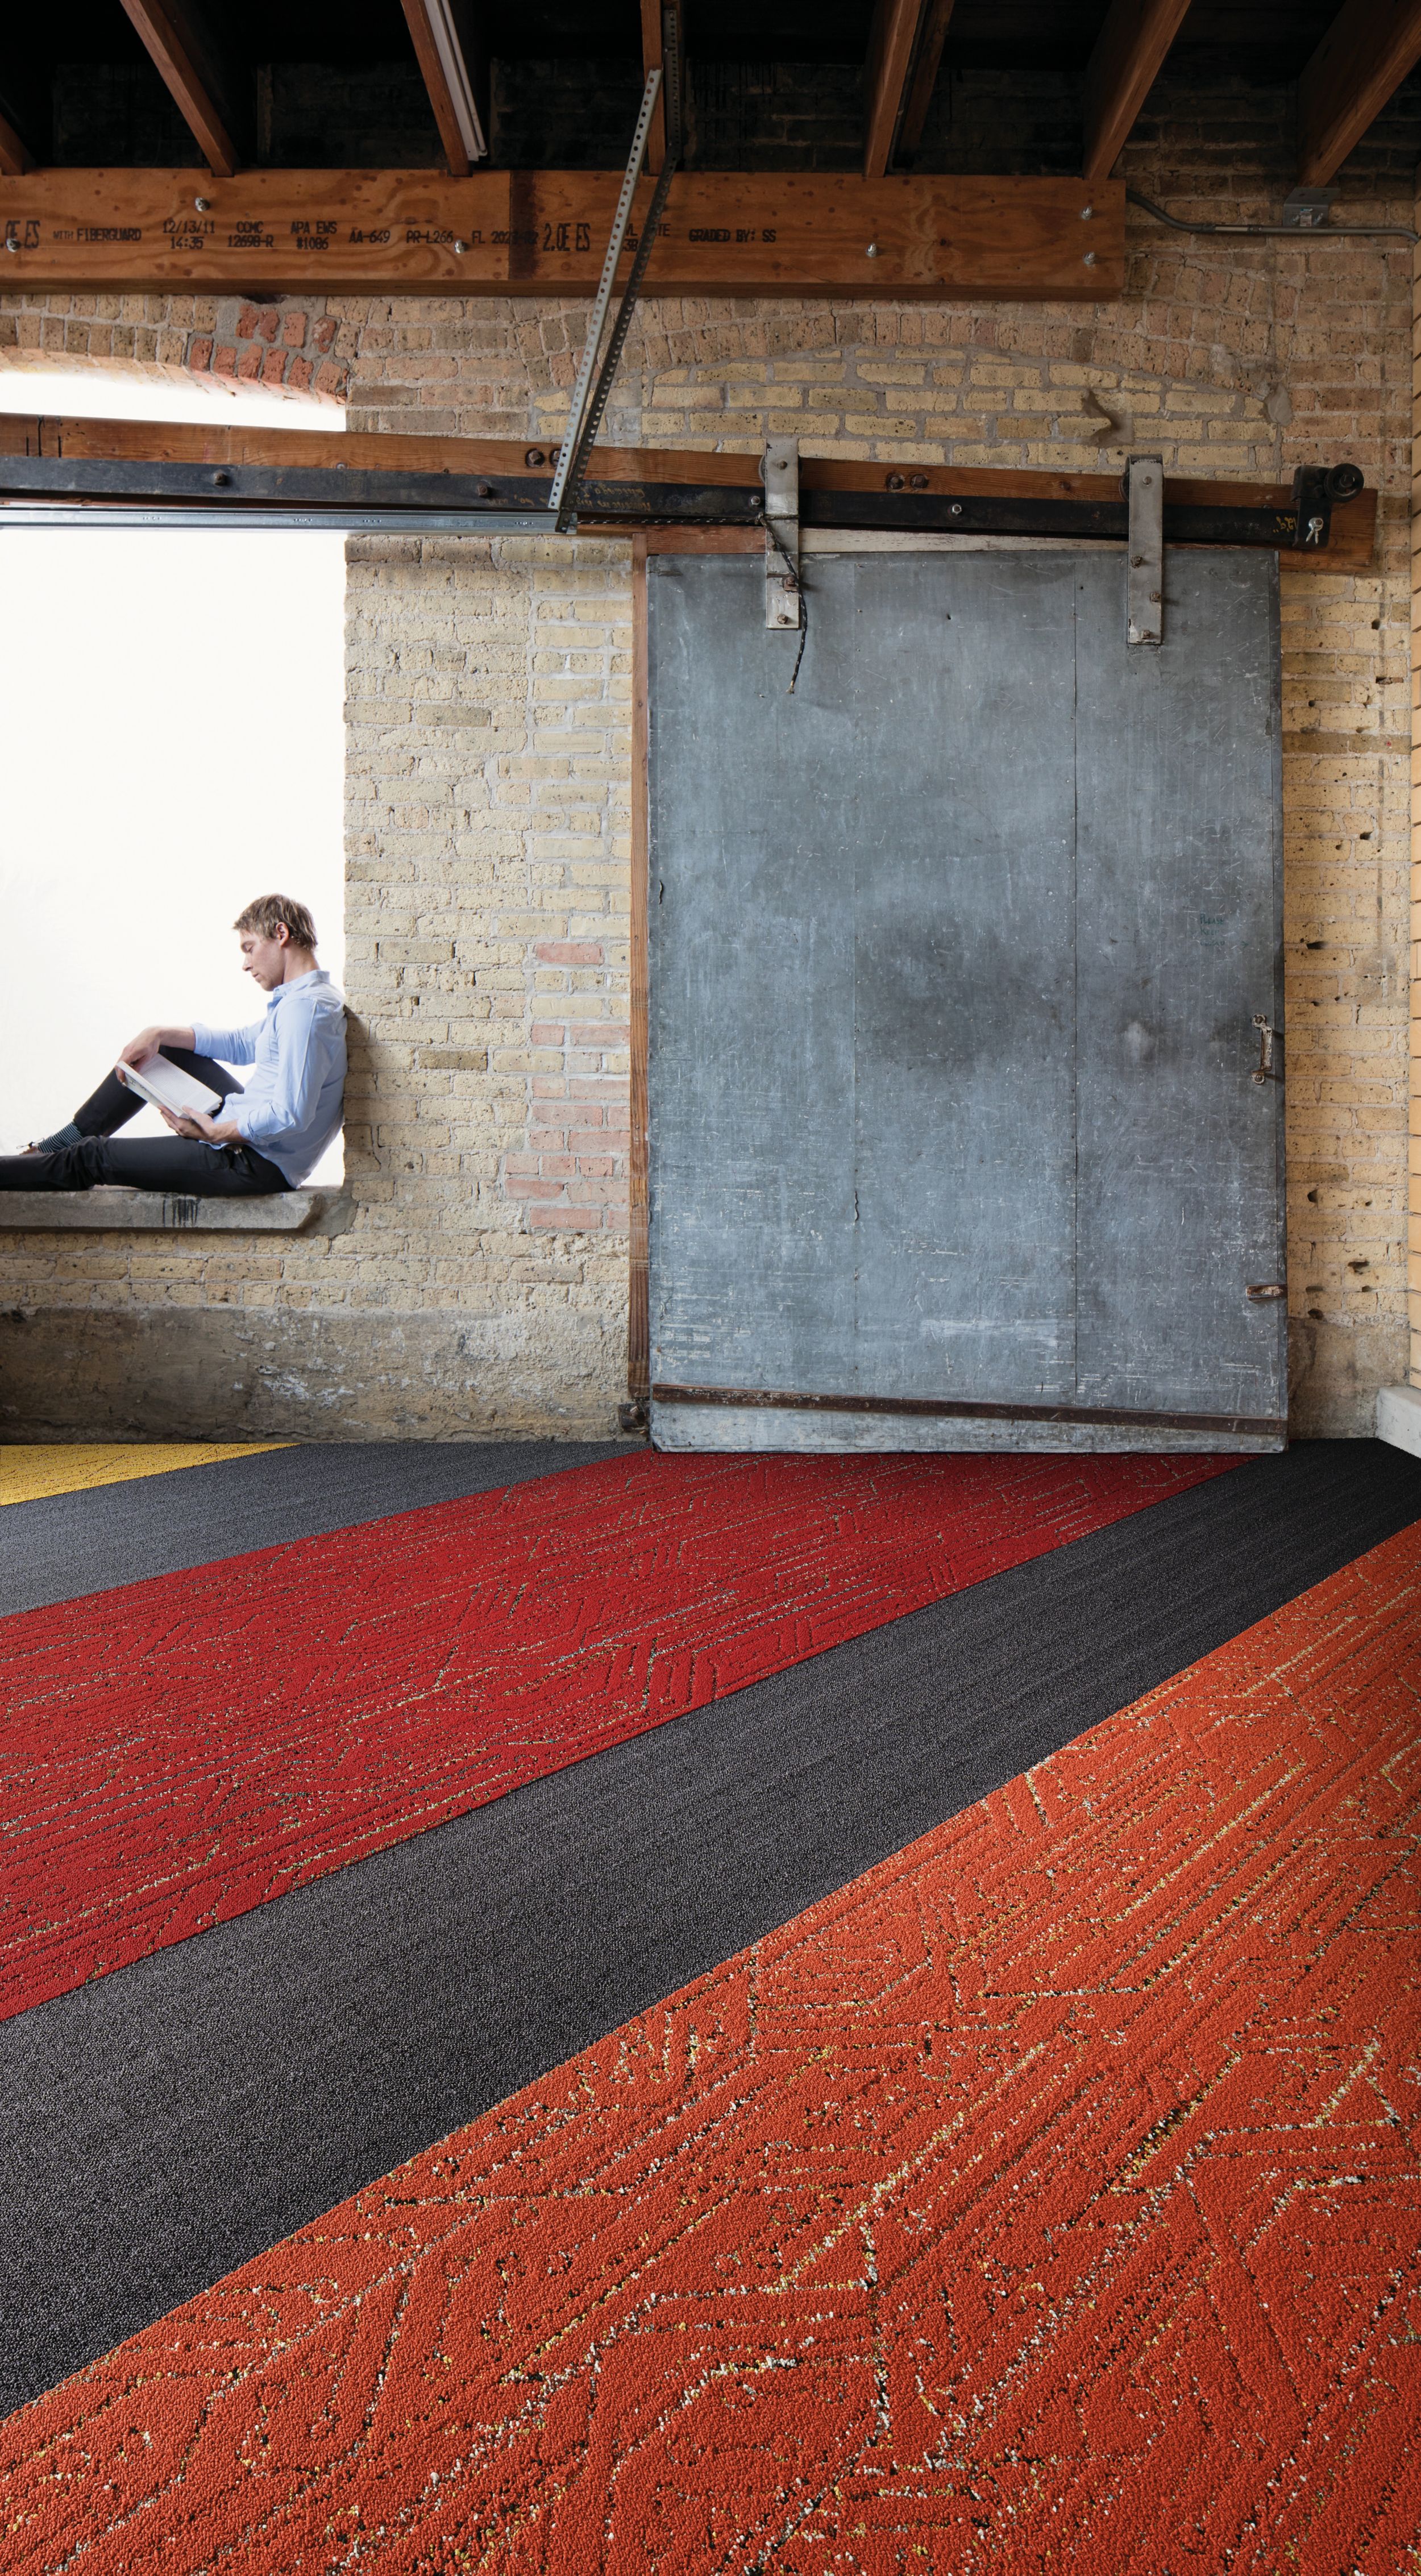 Interface Circuit Board and Plain Stitch plank carpet tile in modern office building with man seated imagen número 6